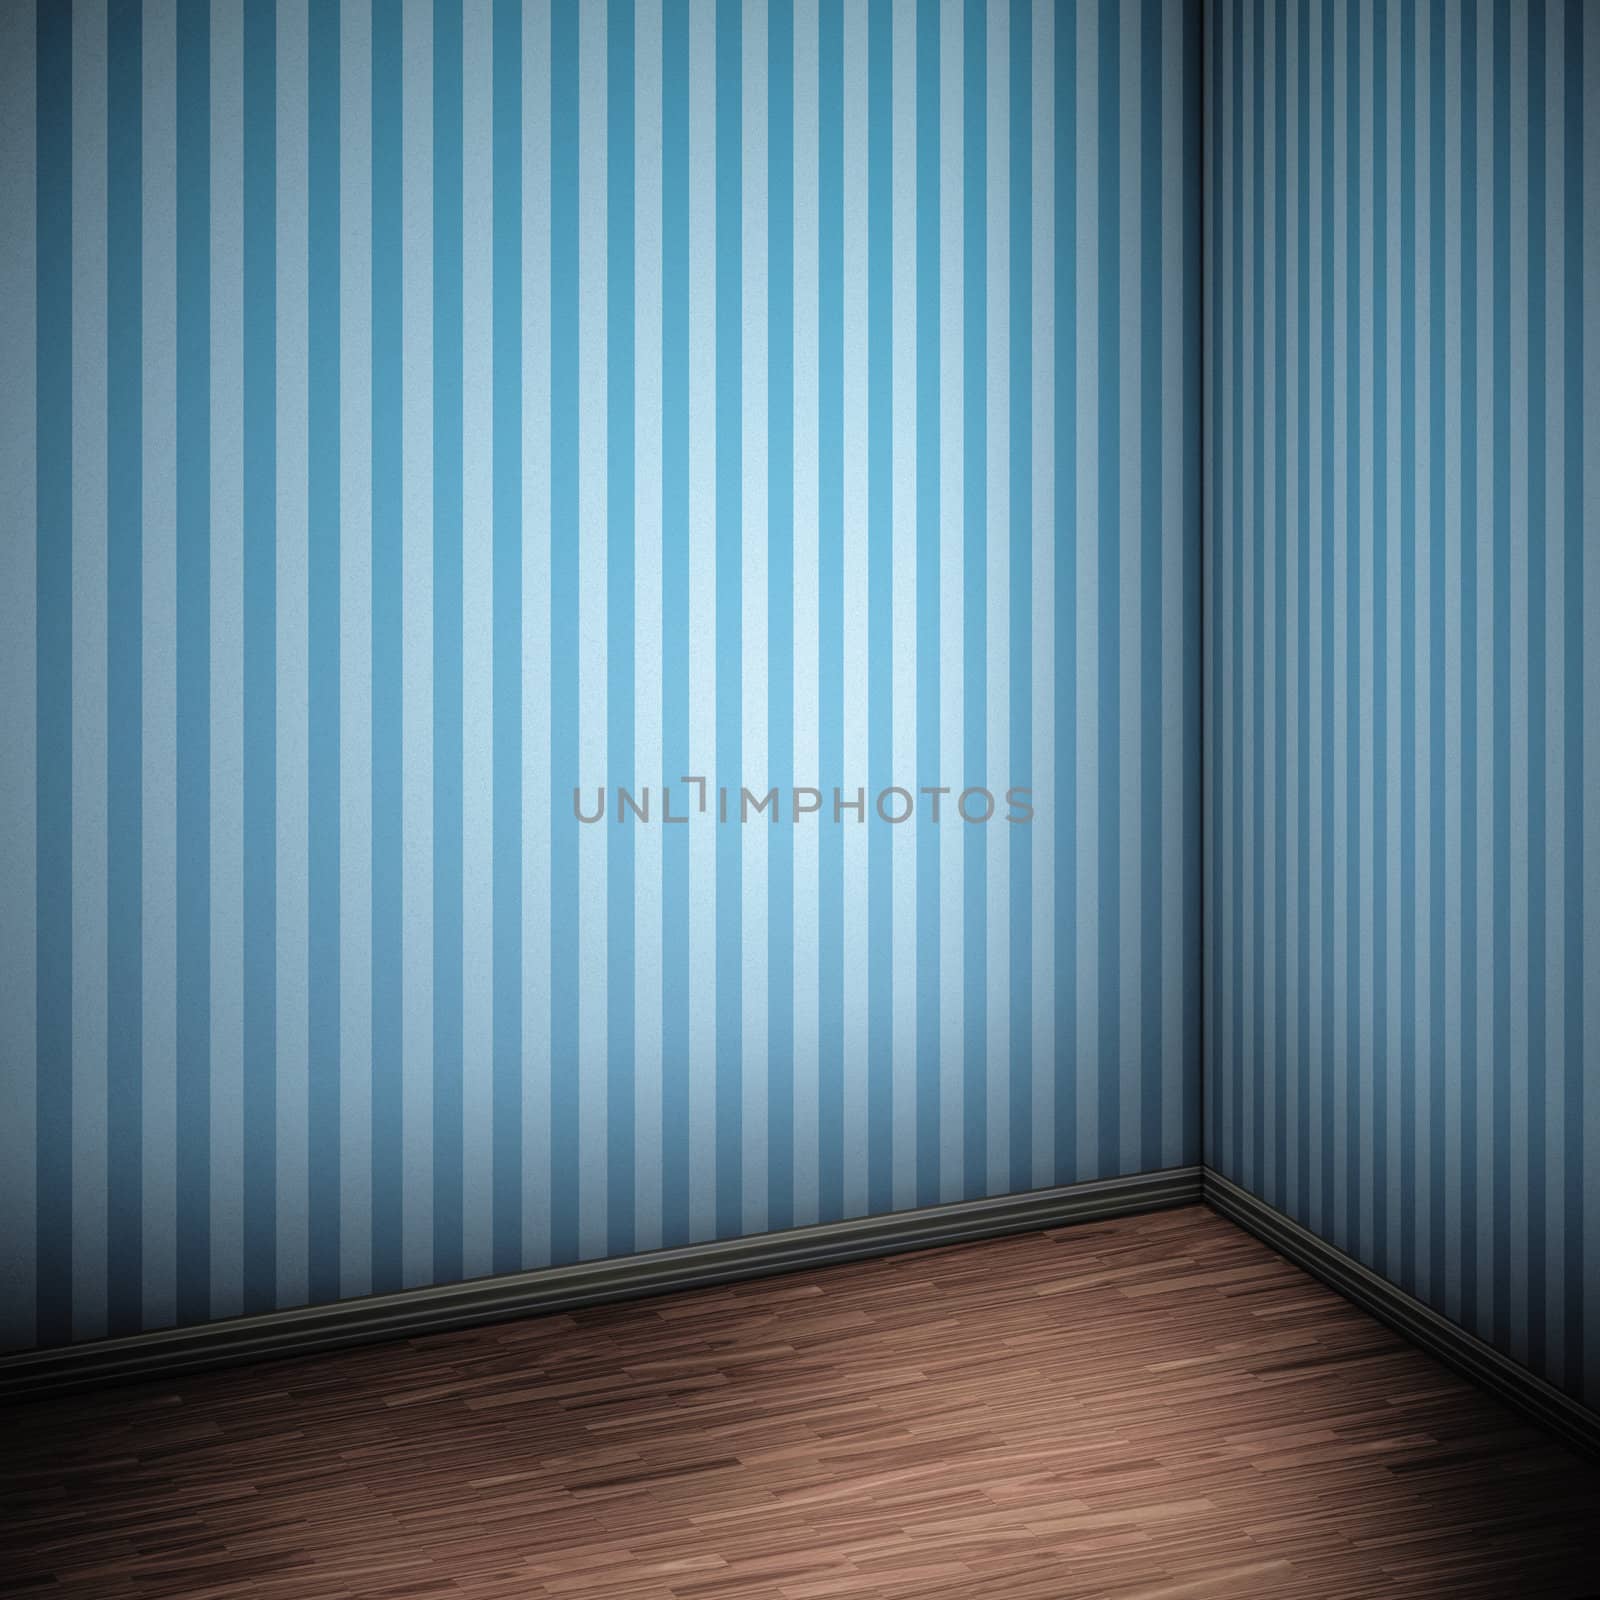 An image of a nice blue room for your content